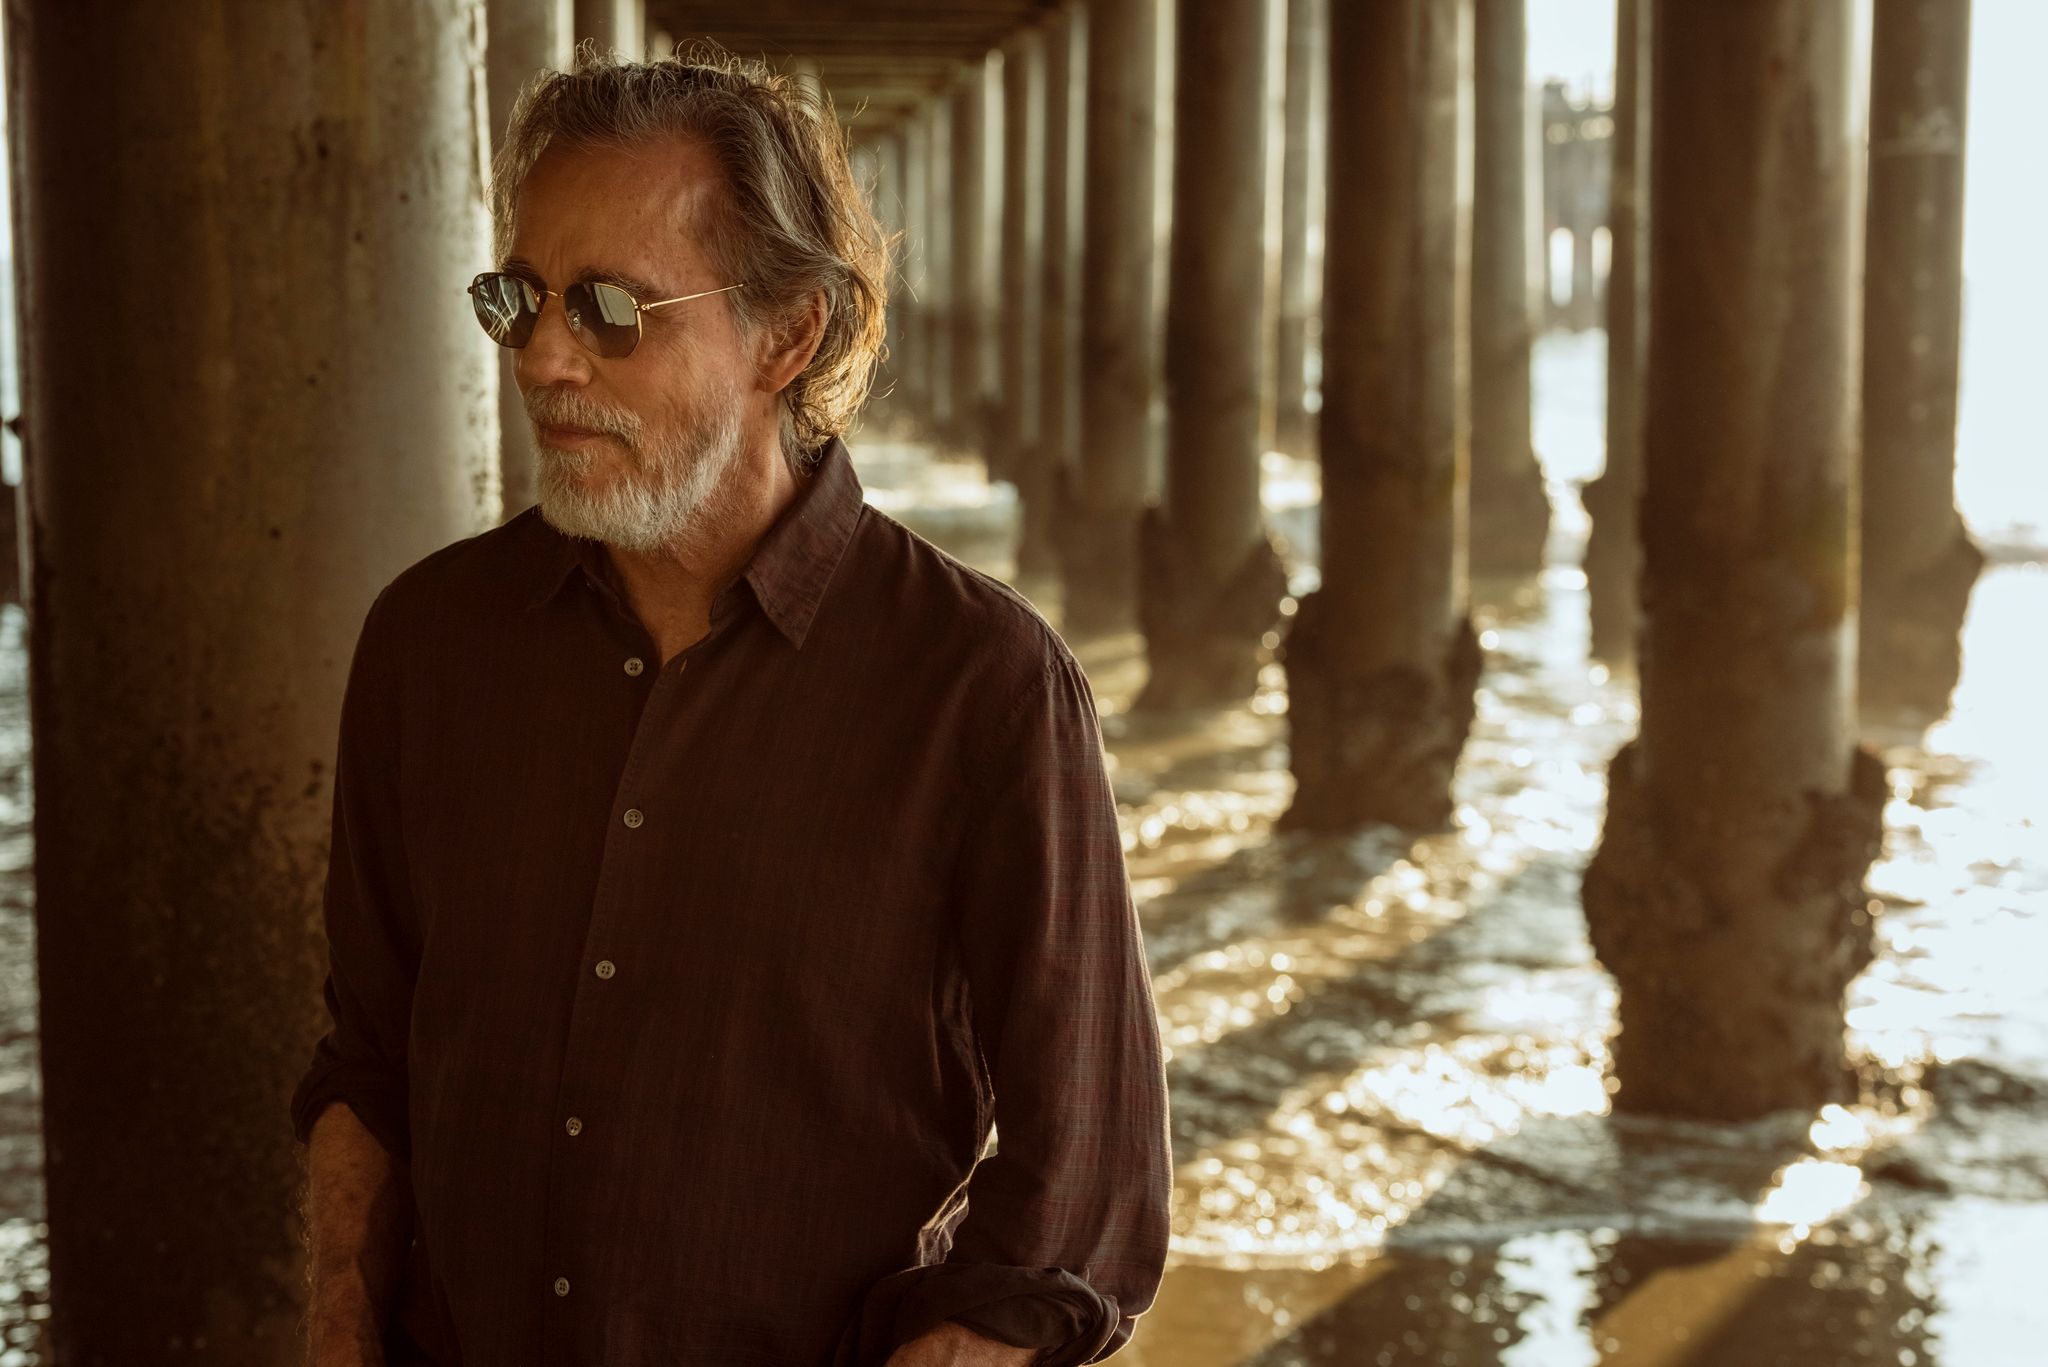 Jackson Browne to Play Vermont Benefit Concert for Jay Craven’s New Film, “Lost Nation” on July 11